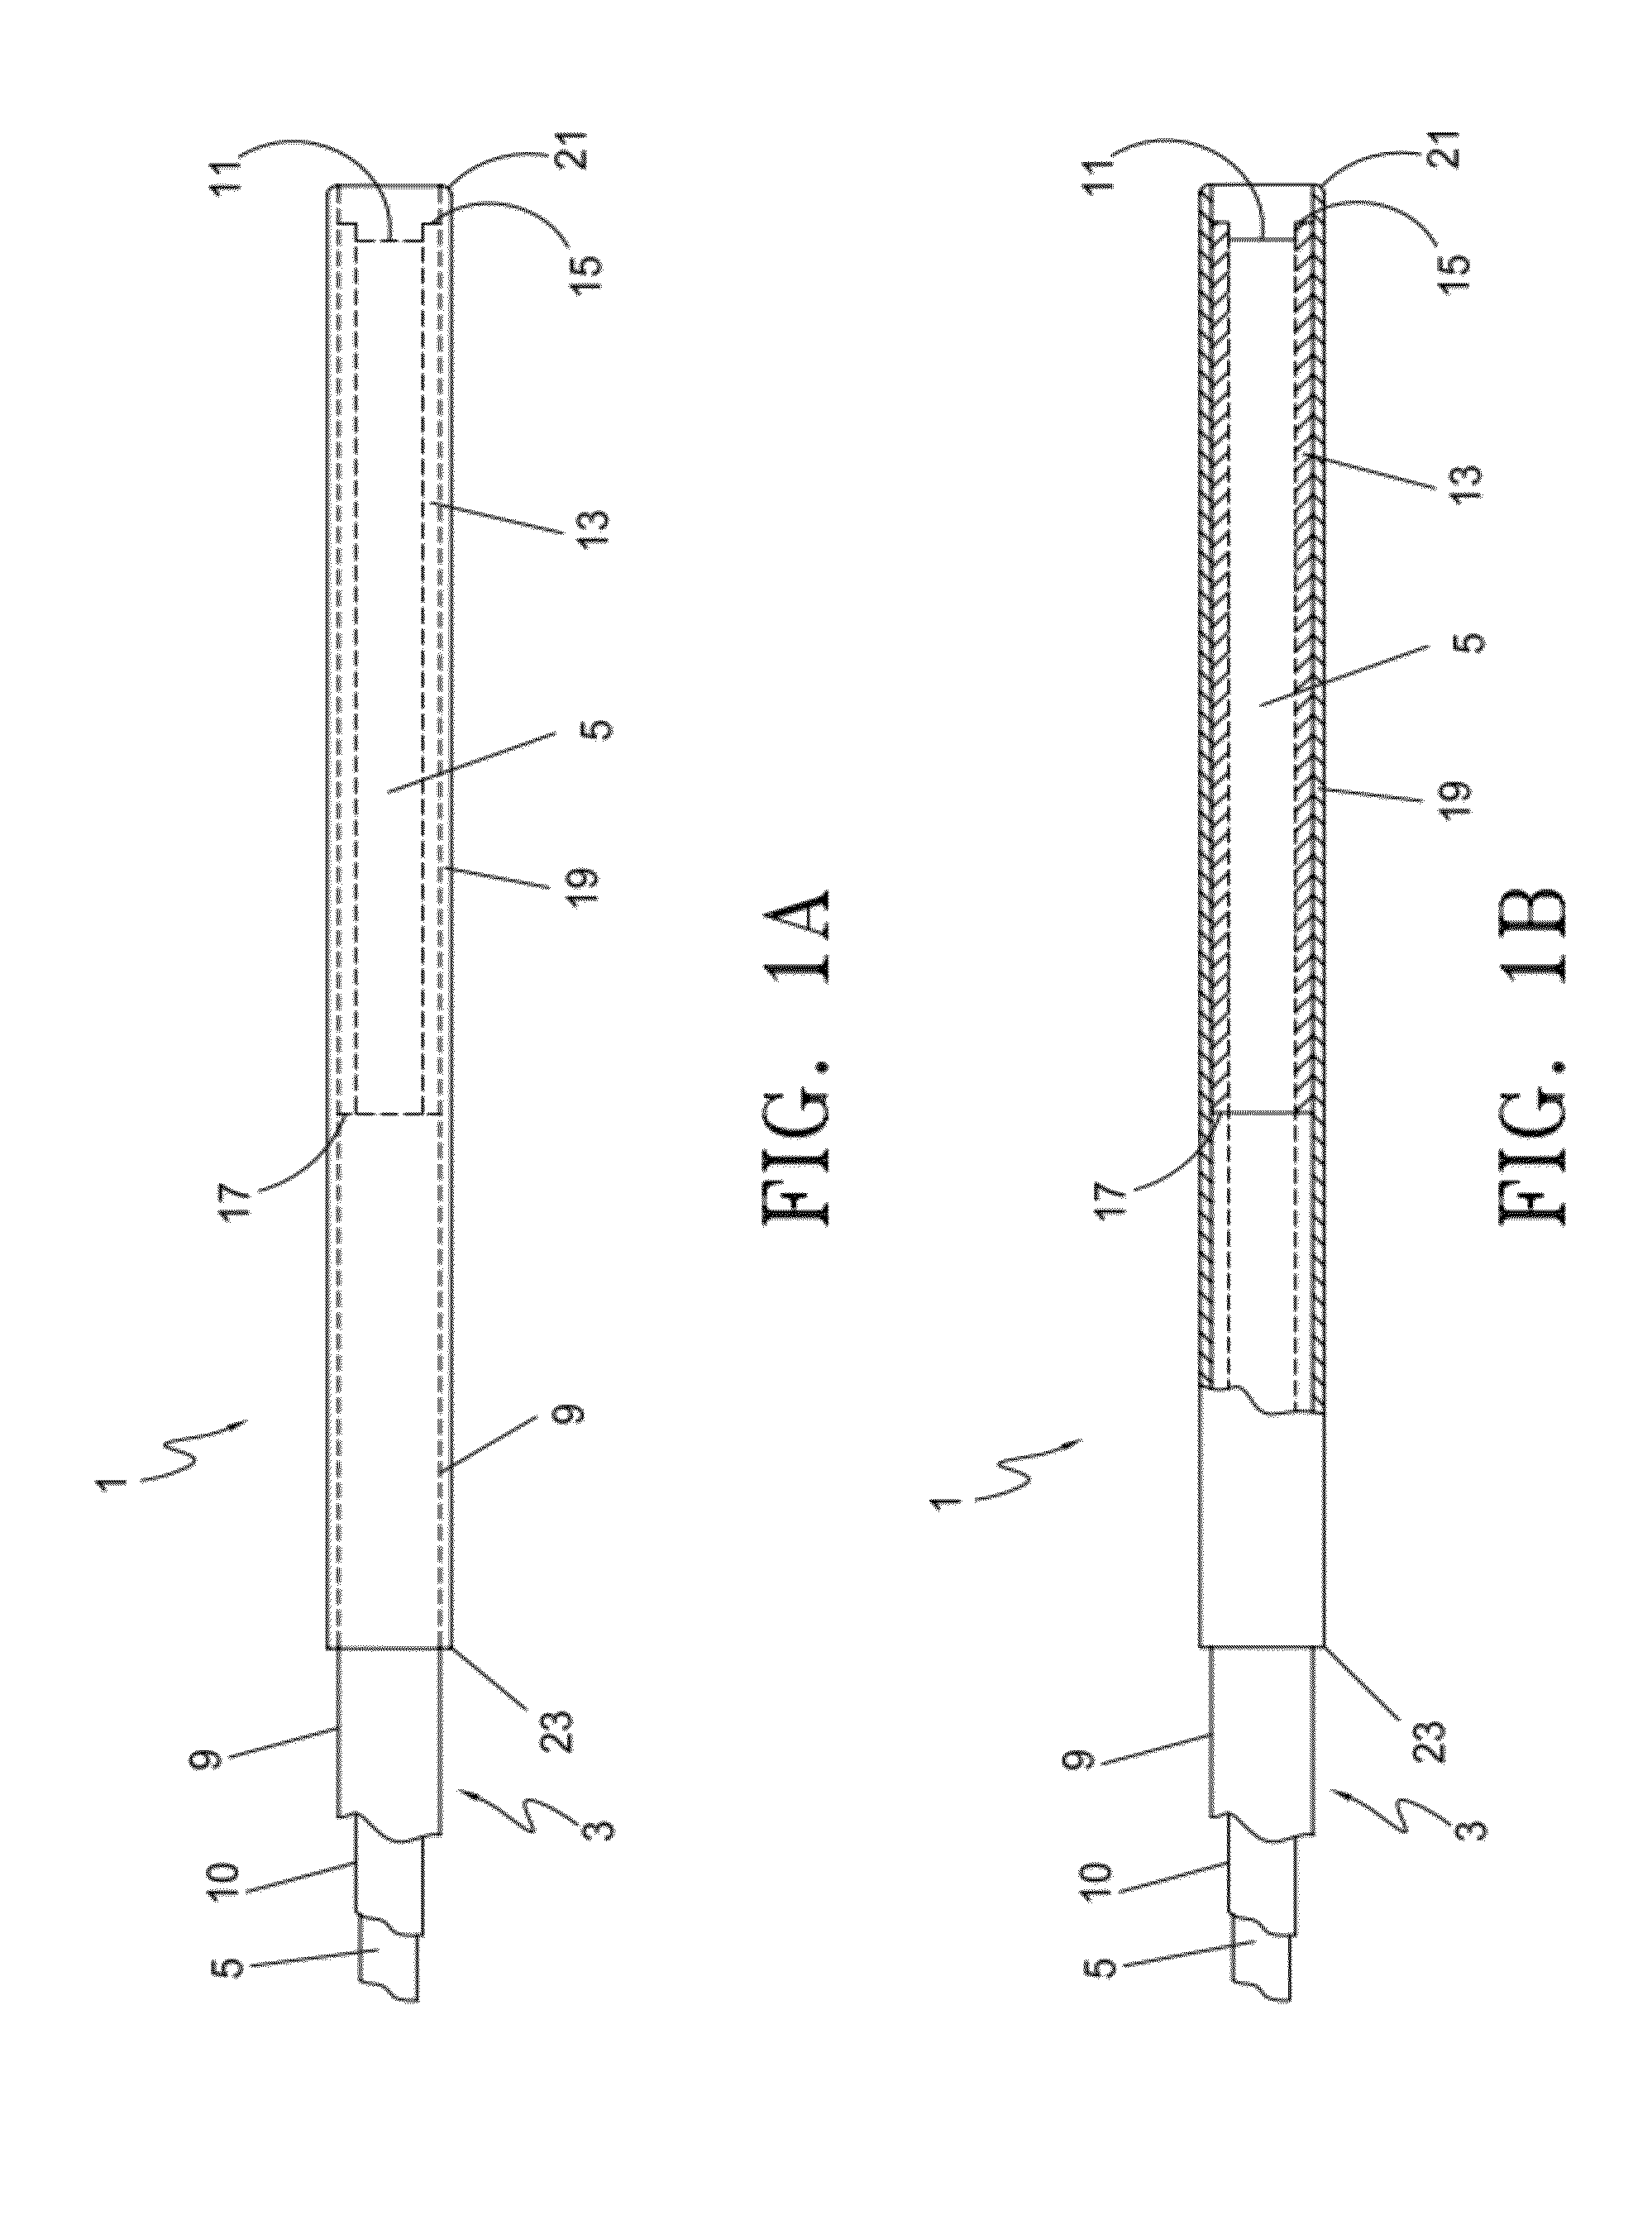 Device and Method for Endovascular Treatment for Causing Closure of a Blood Vessel